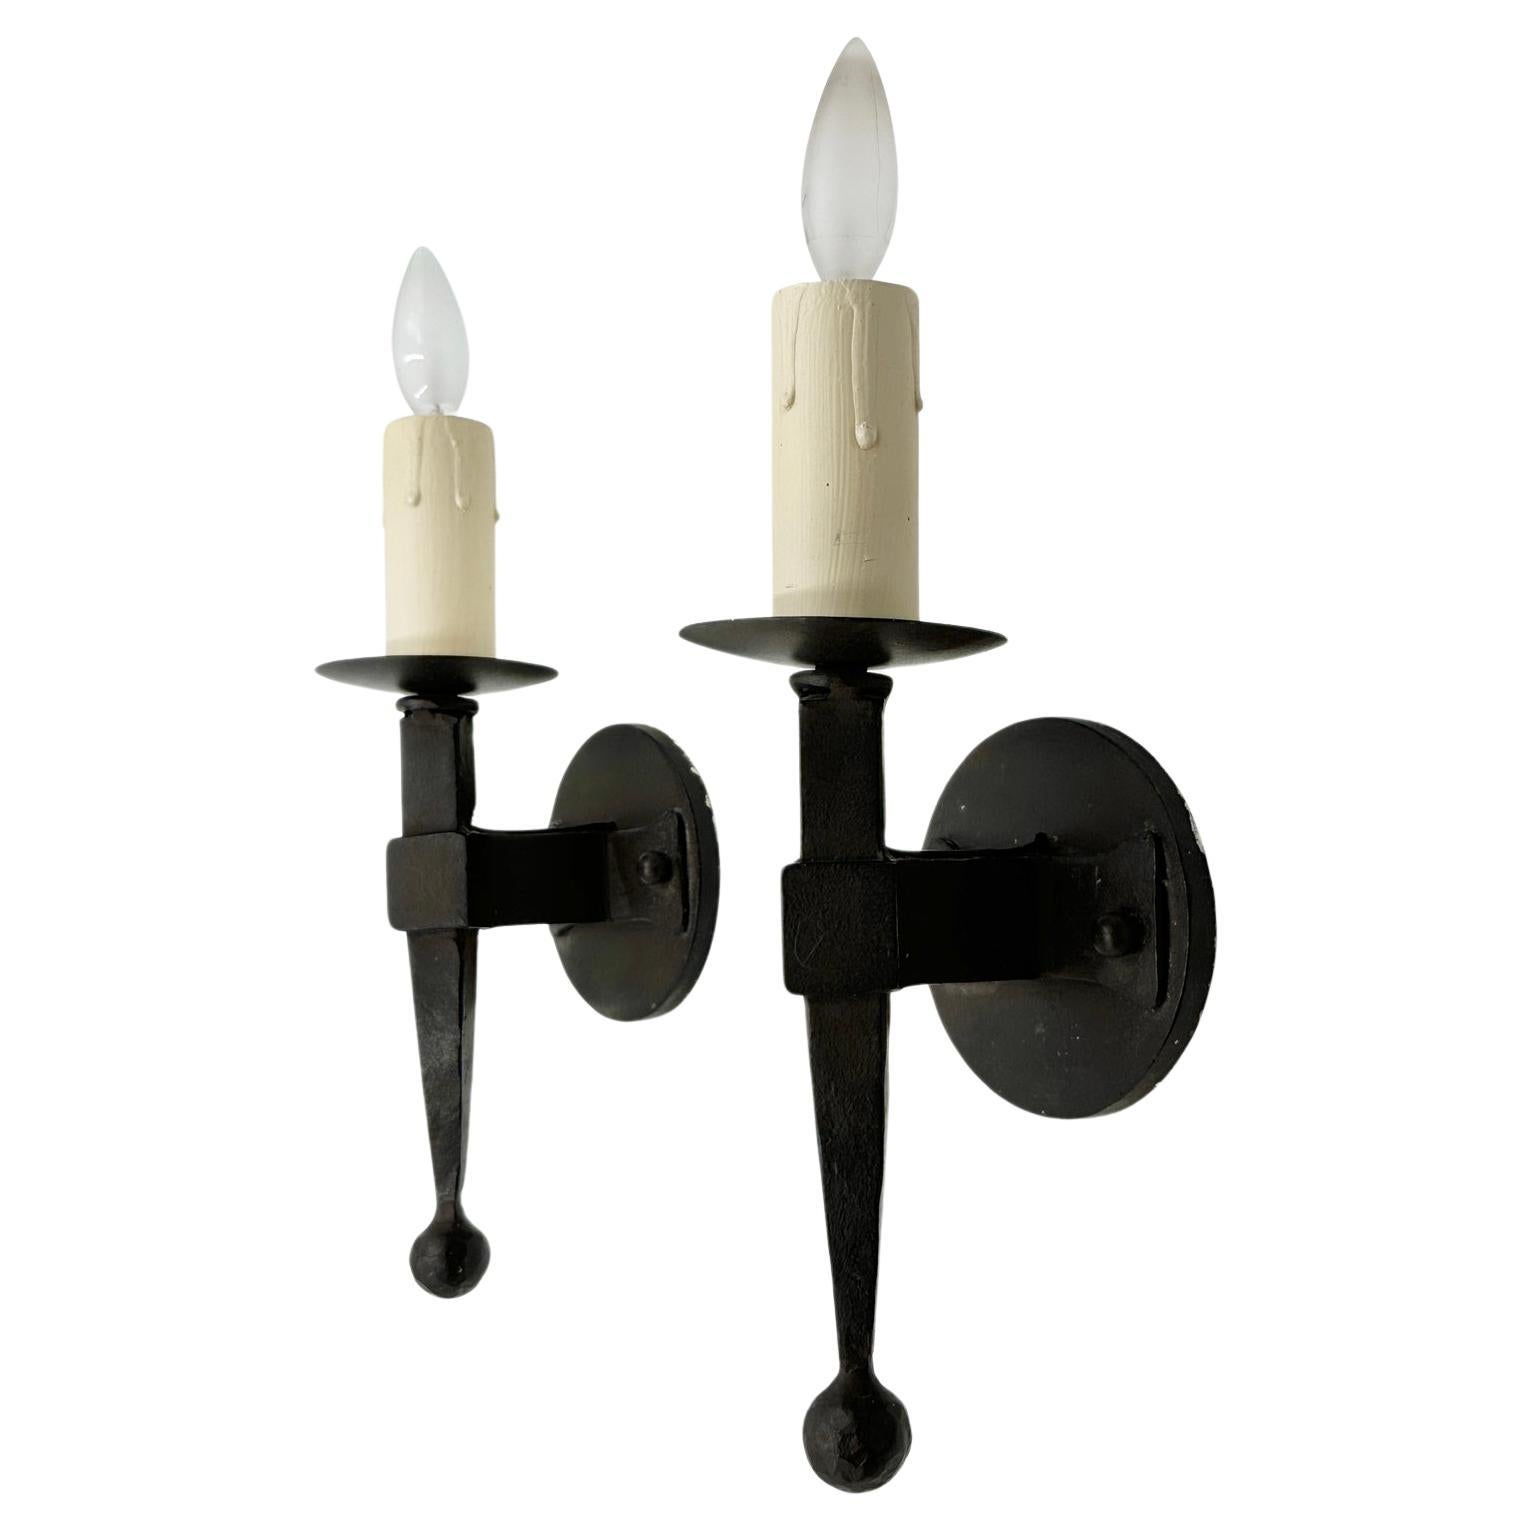 Pair of Wall Sconces by Paul Ferrante, USA 2009